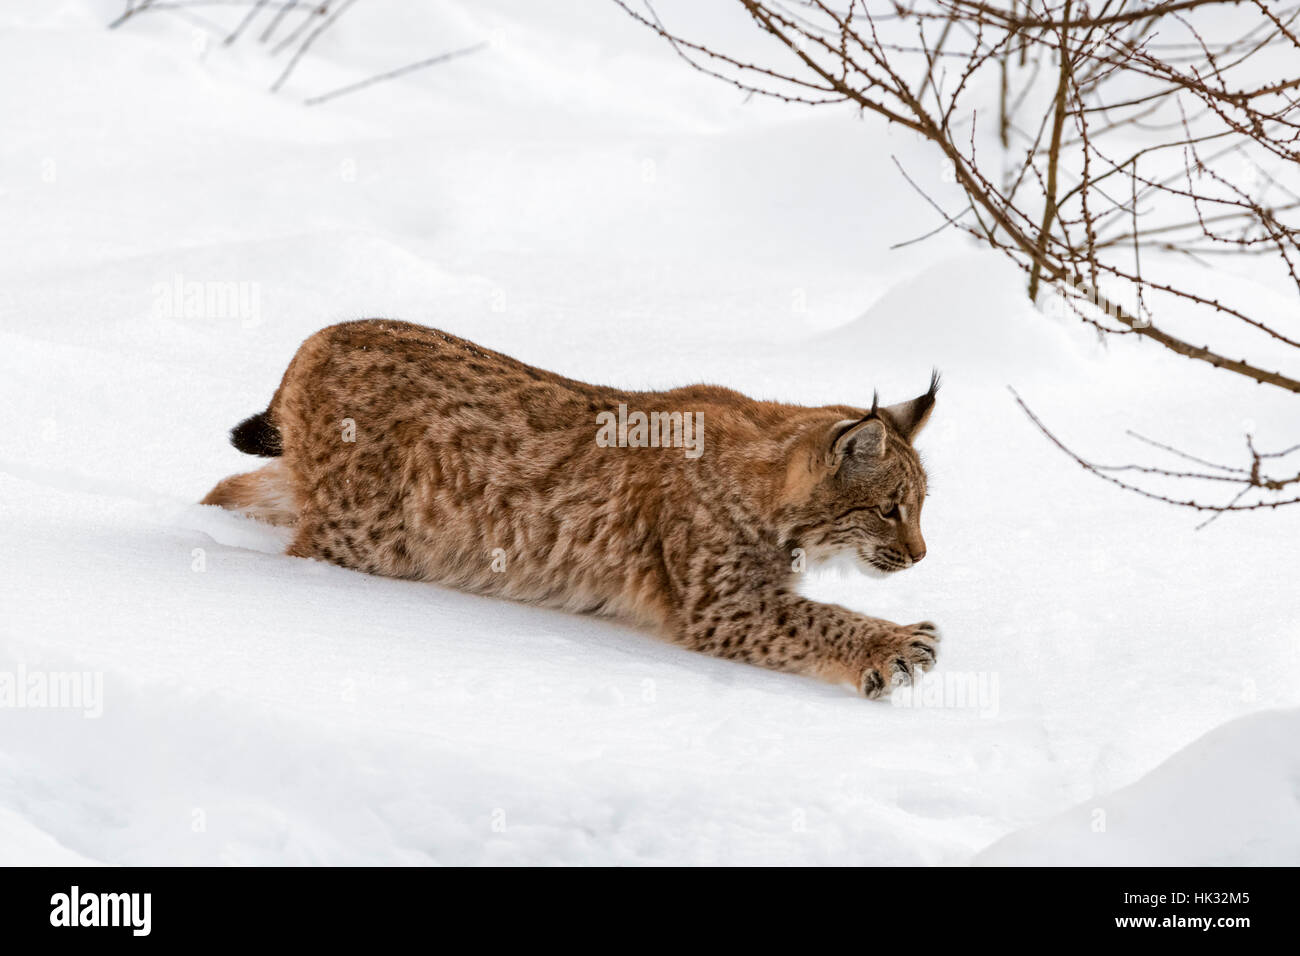 Juvenile one year old Eurasian lynx (Lynx lynx) stalking prey with outstretched claws in the snow in winter Stock Photo